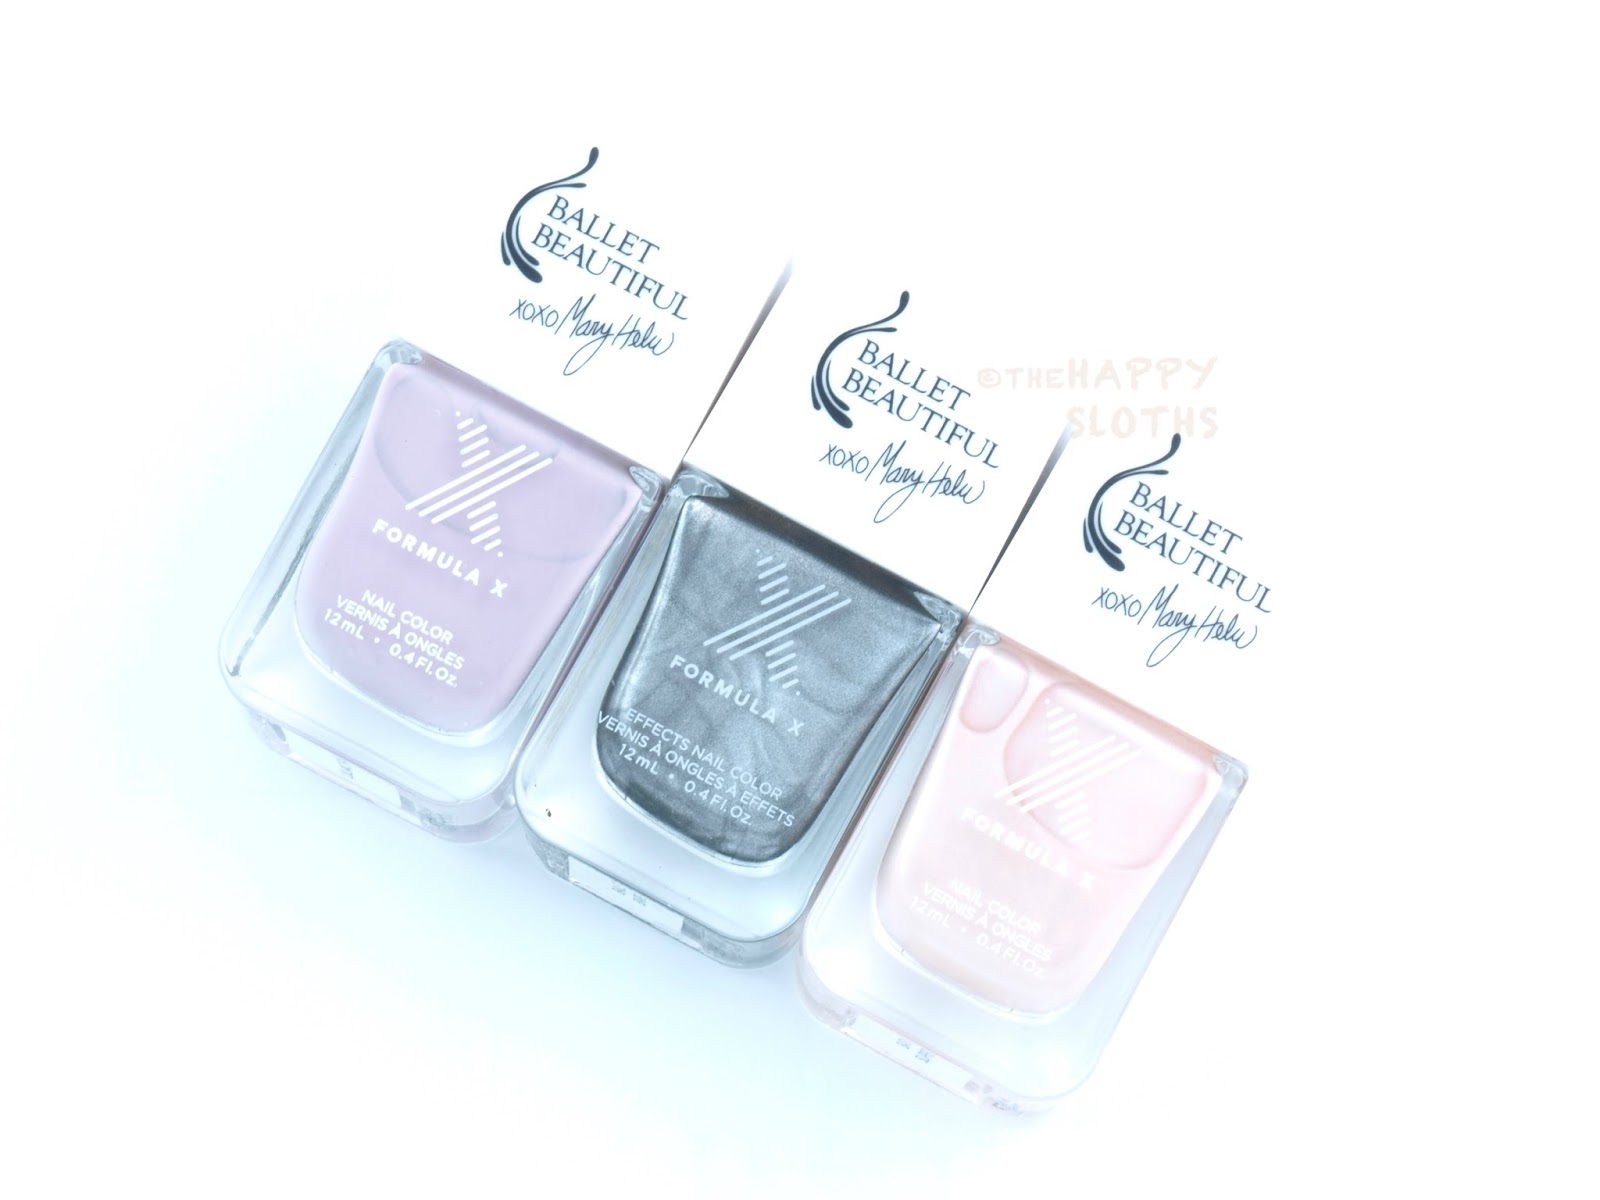 Formula X #ColorCurators Ballet Beautiful Collection: Review and Swatches